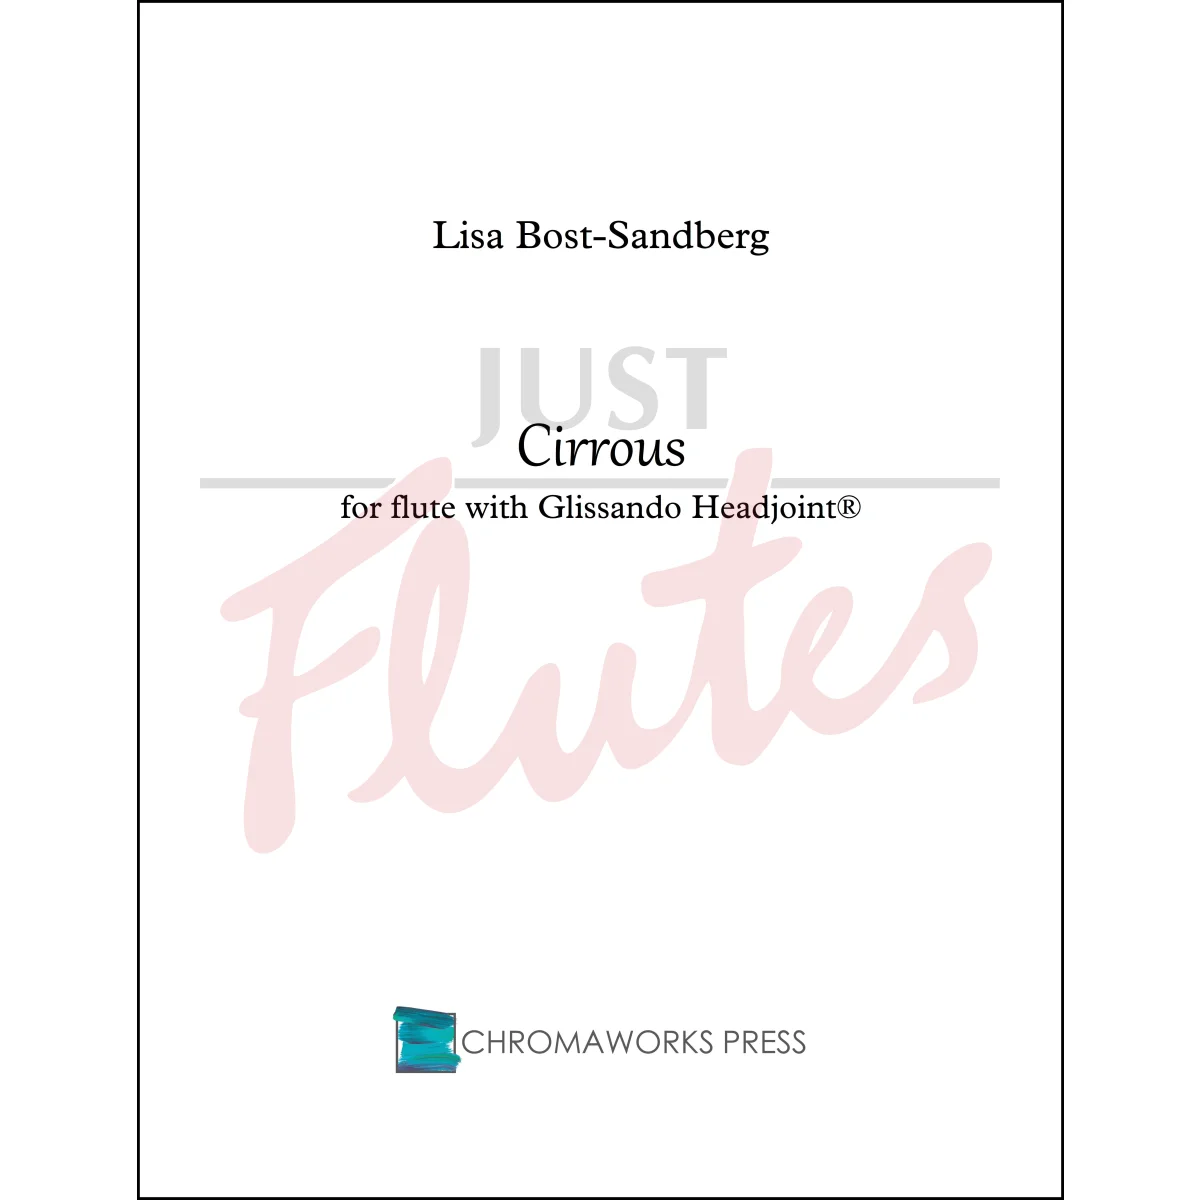 Cirrous for Flute with Glissando Headjoint